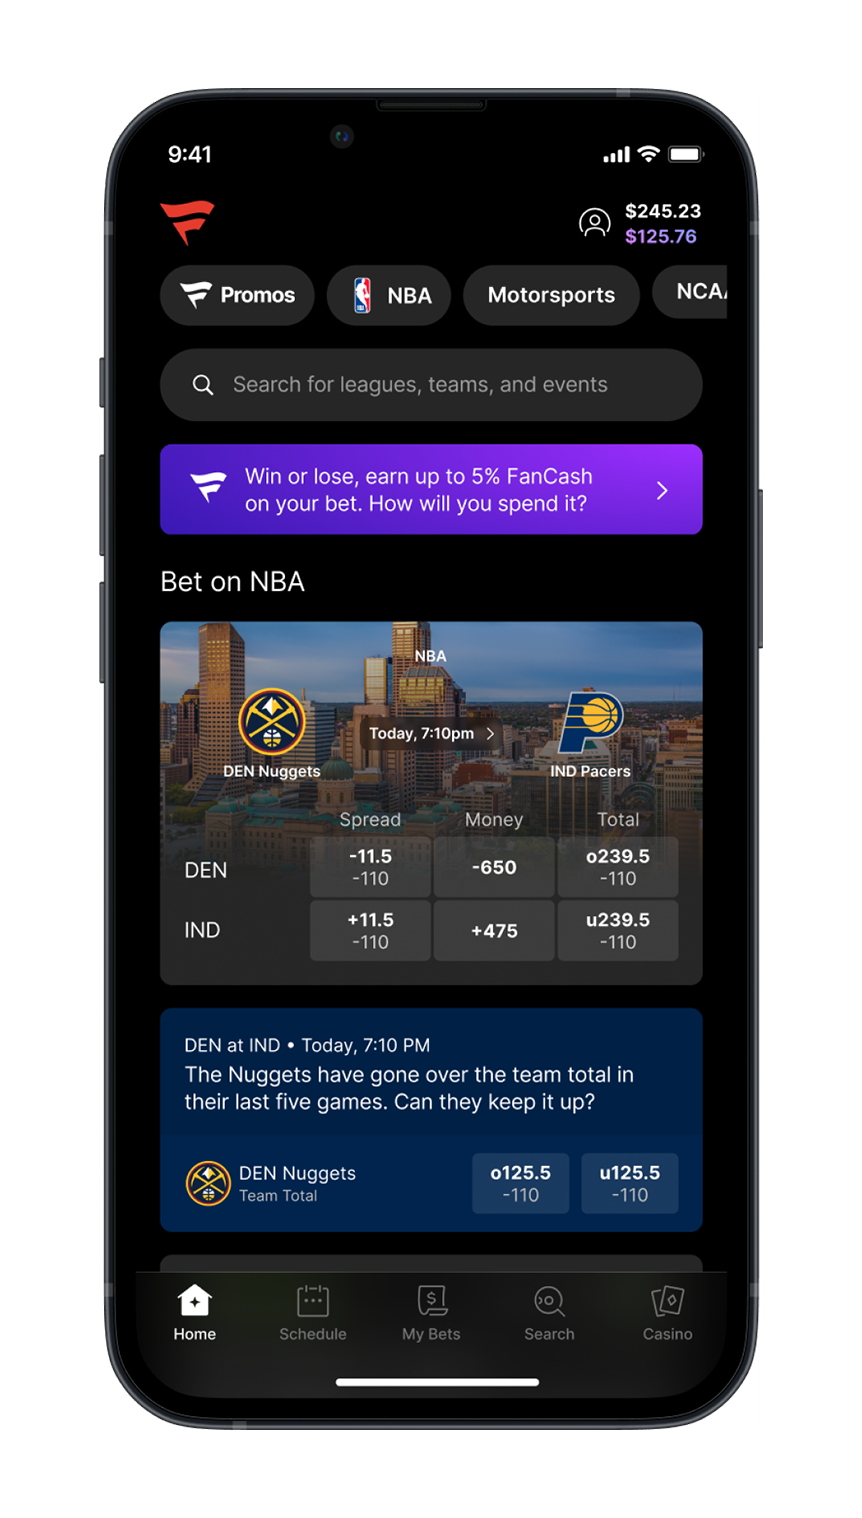 Discover page - showing personalized bets